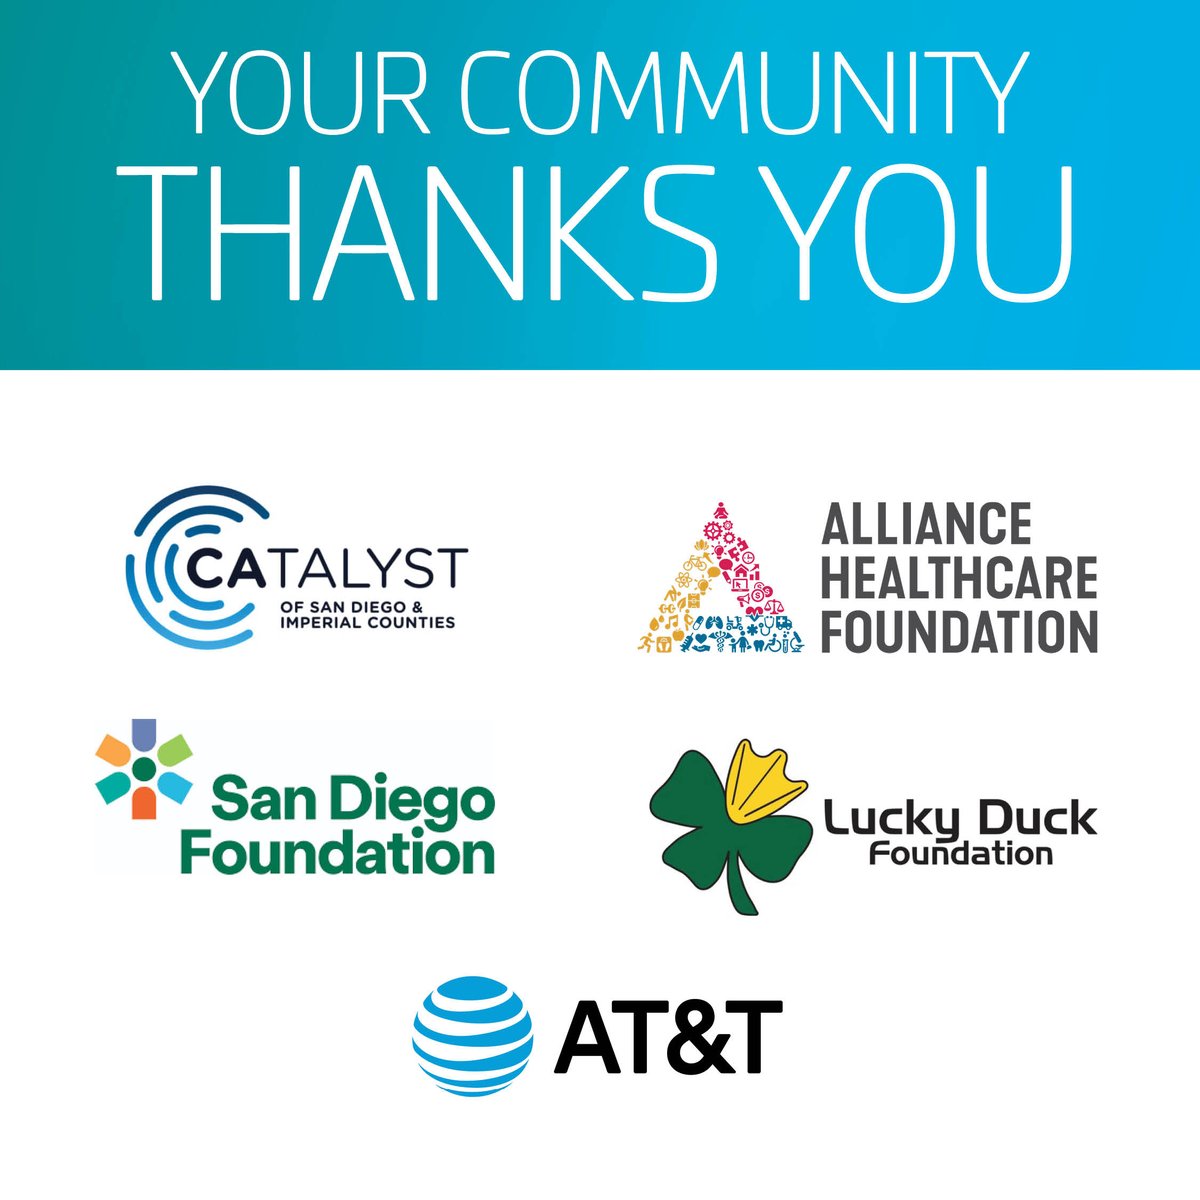 We're deeply grateful to our lead donors: @sd_fdn, @ATT, @AllianceHF, @LuckyDuckFound, and @SDCatalyst. Your generosity helped us provide essential services to over 1,000 San Diegans affected by the recent storm. Thank you!♥️